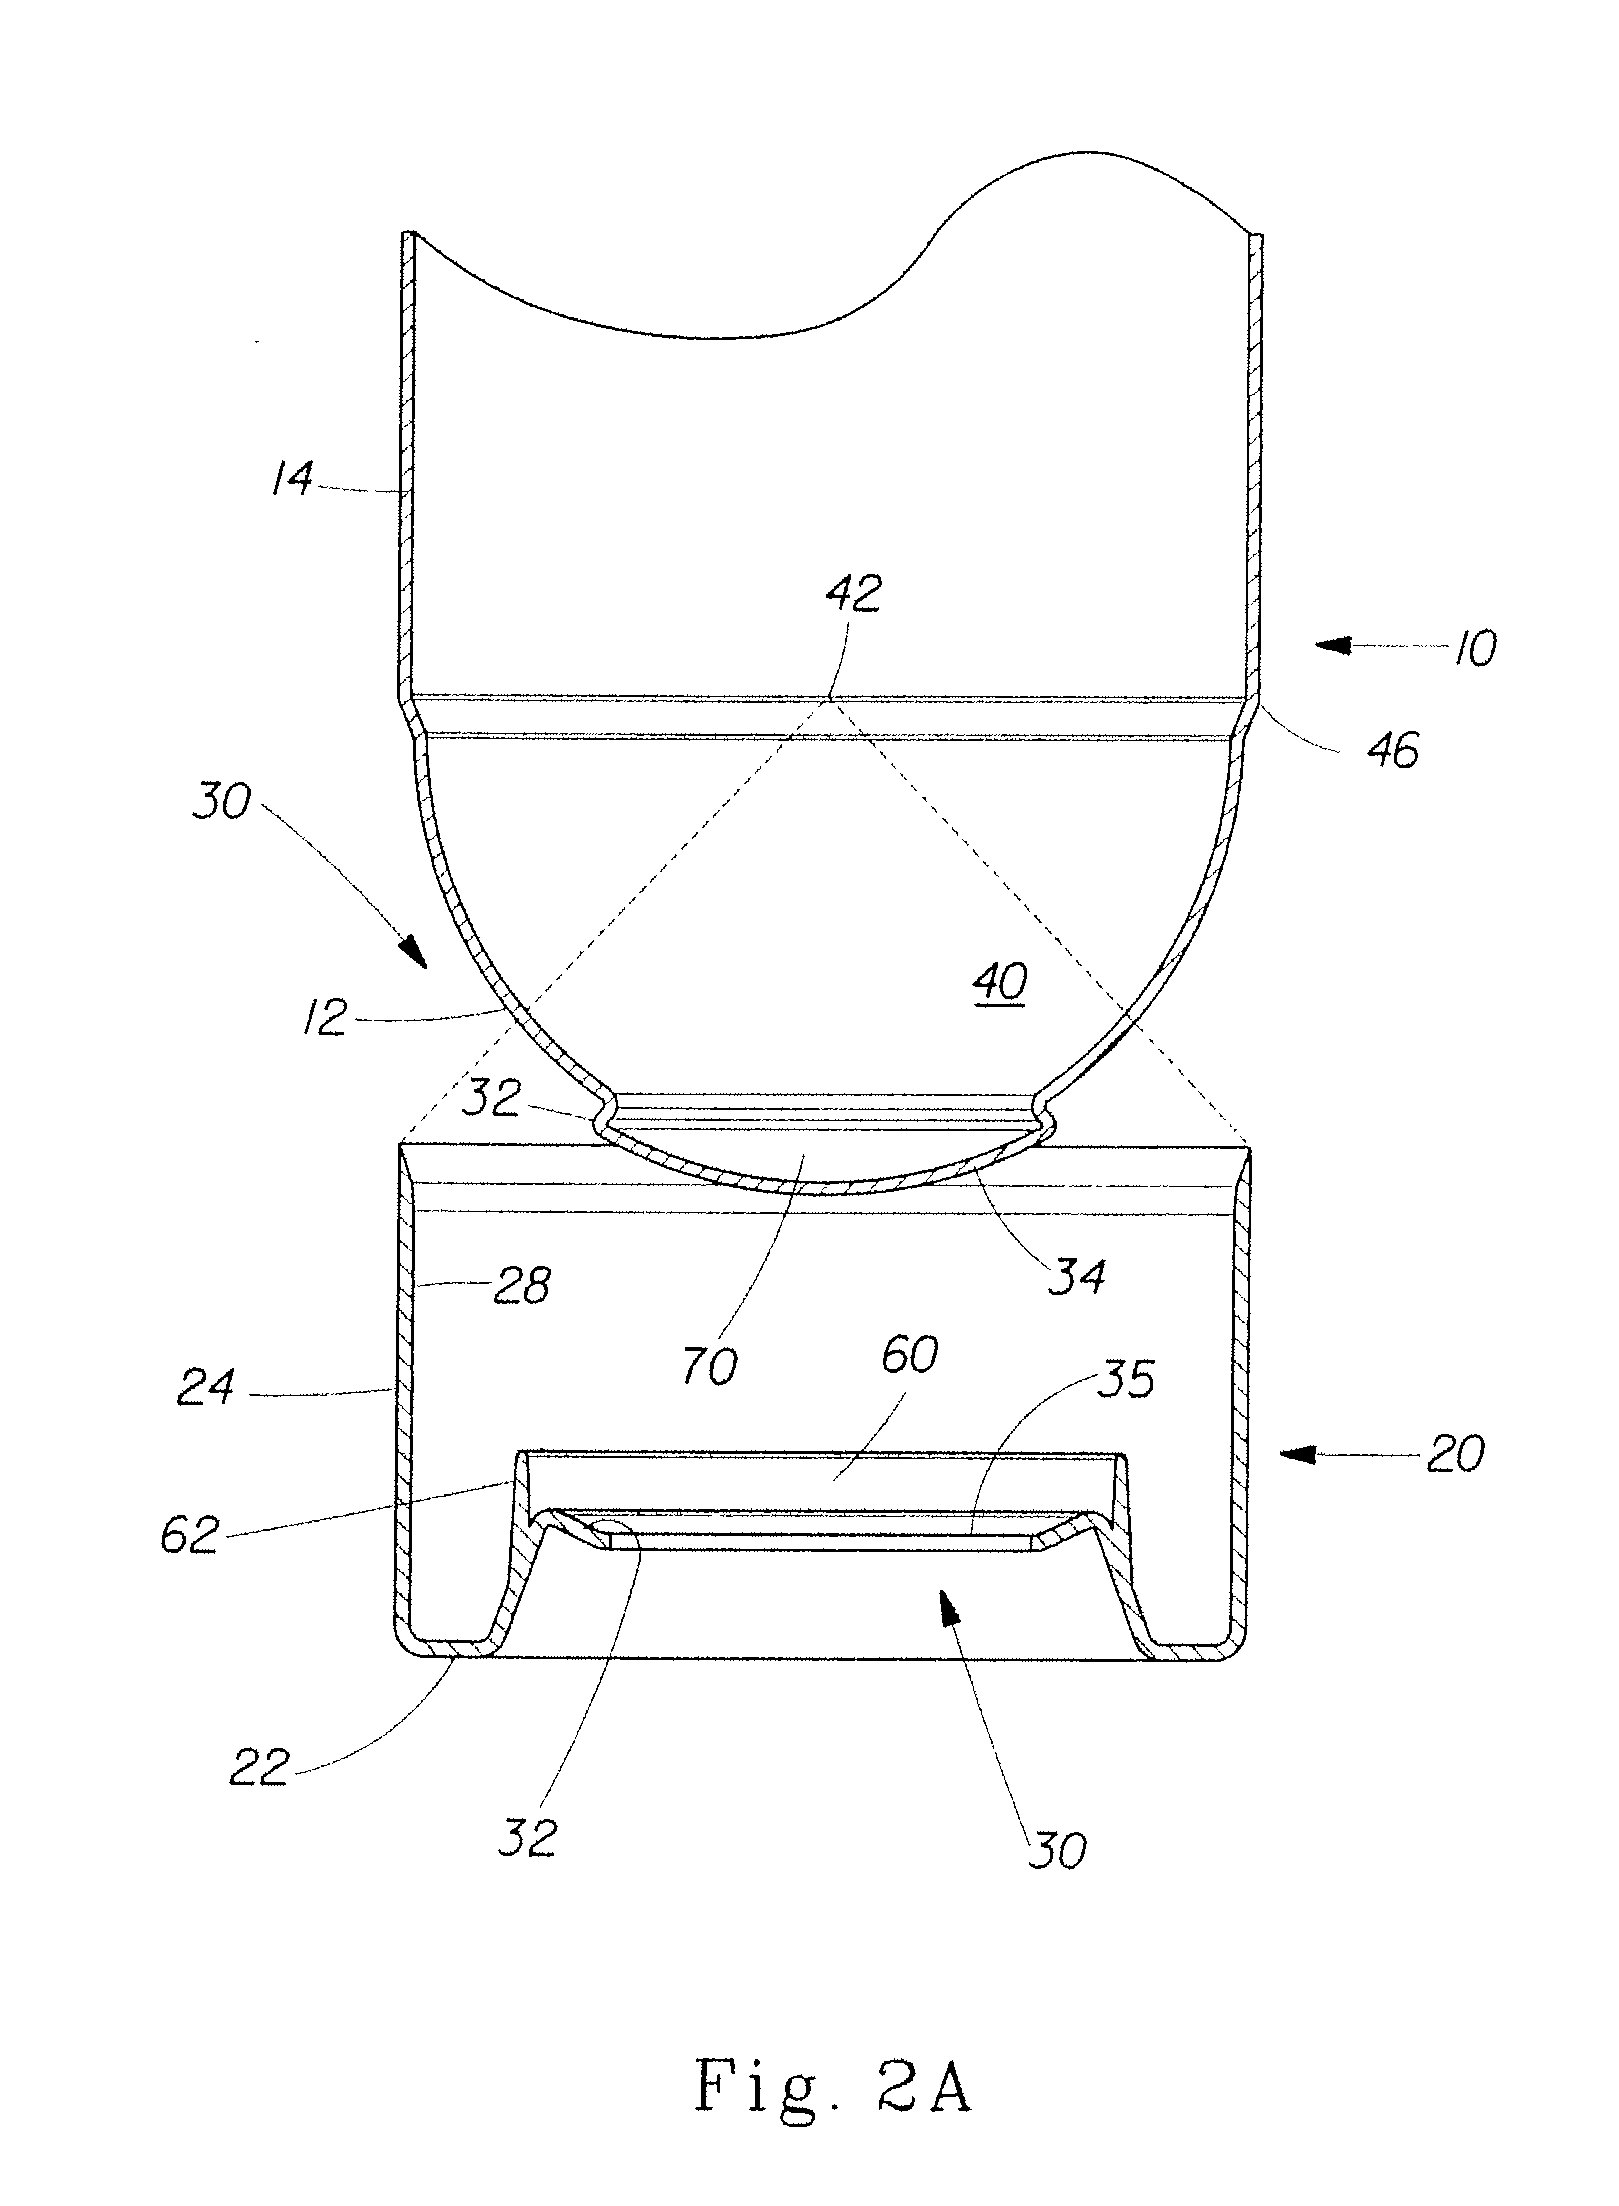 Supportable Pressurizable Container having a Bottom for Receiving a Dip Tube and Base Cup Therefor